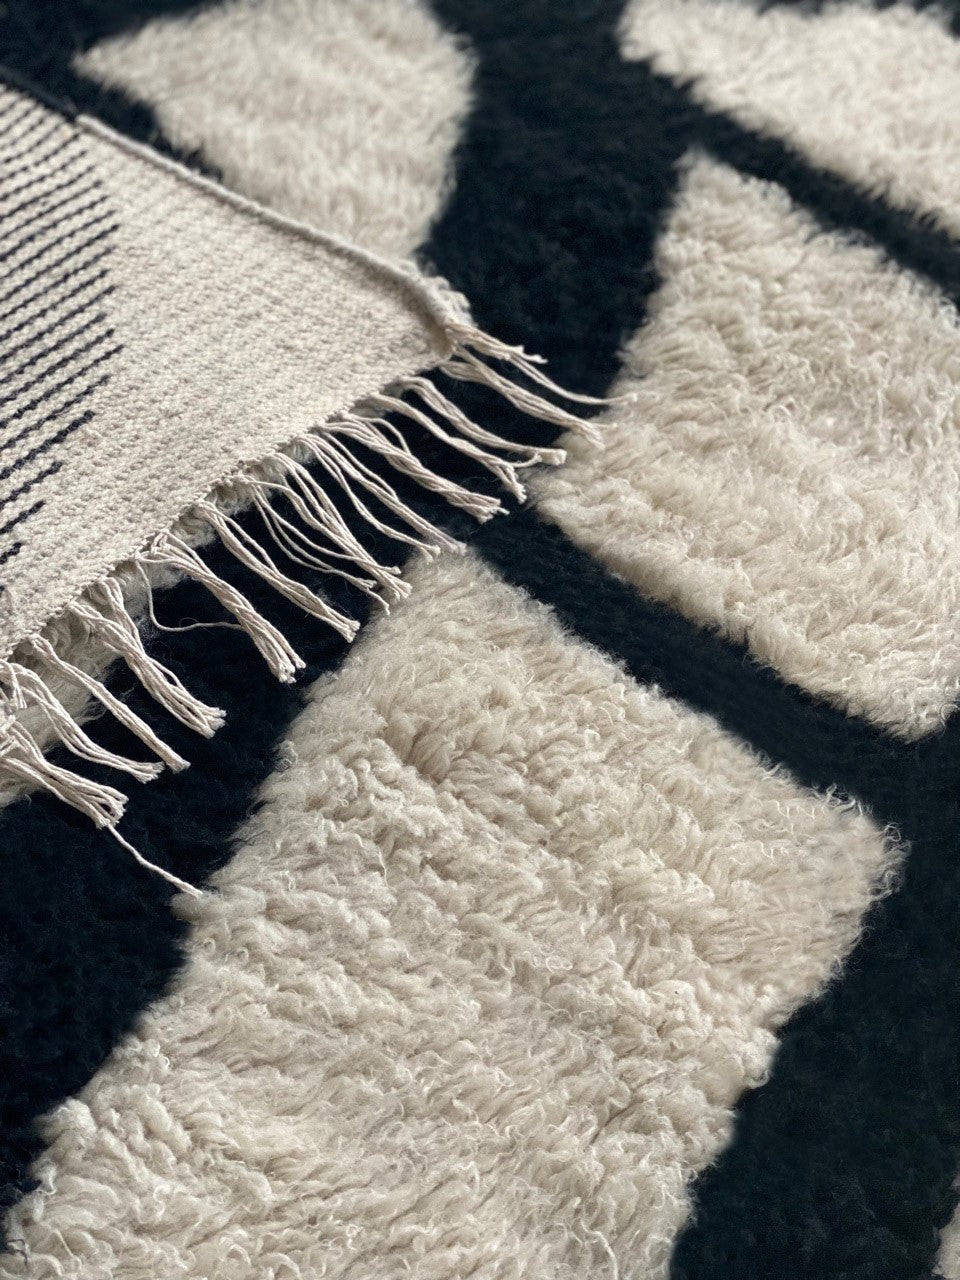 A close-up picture of Running Roots showing the details of the handmade artist rug